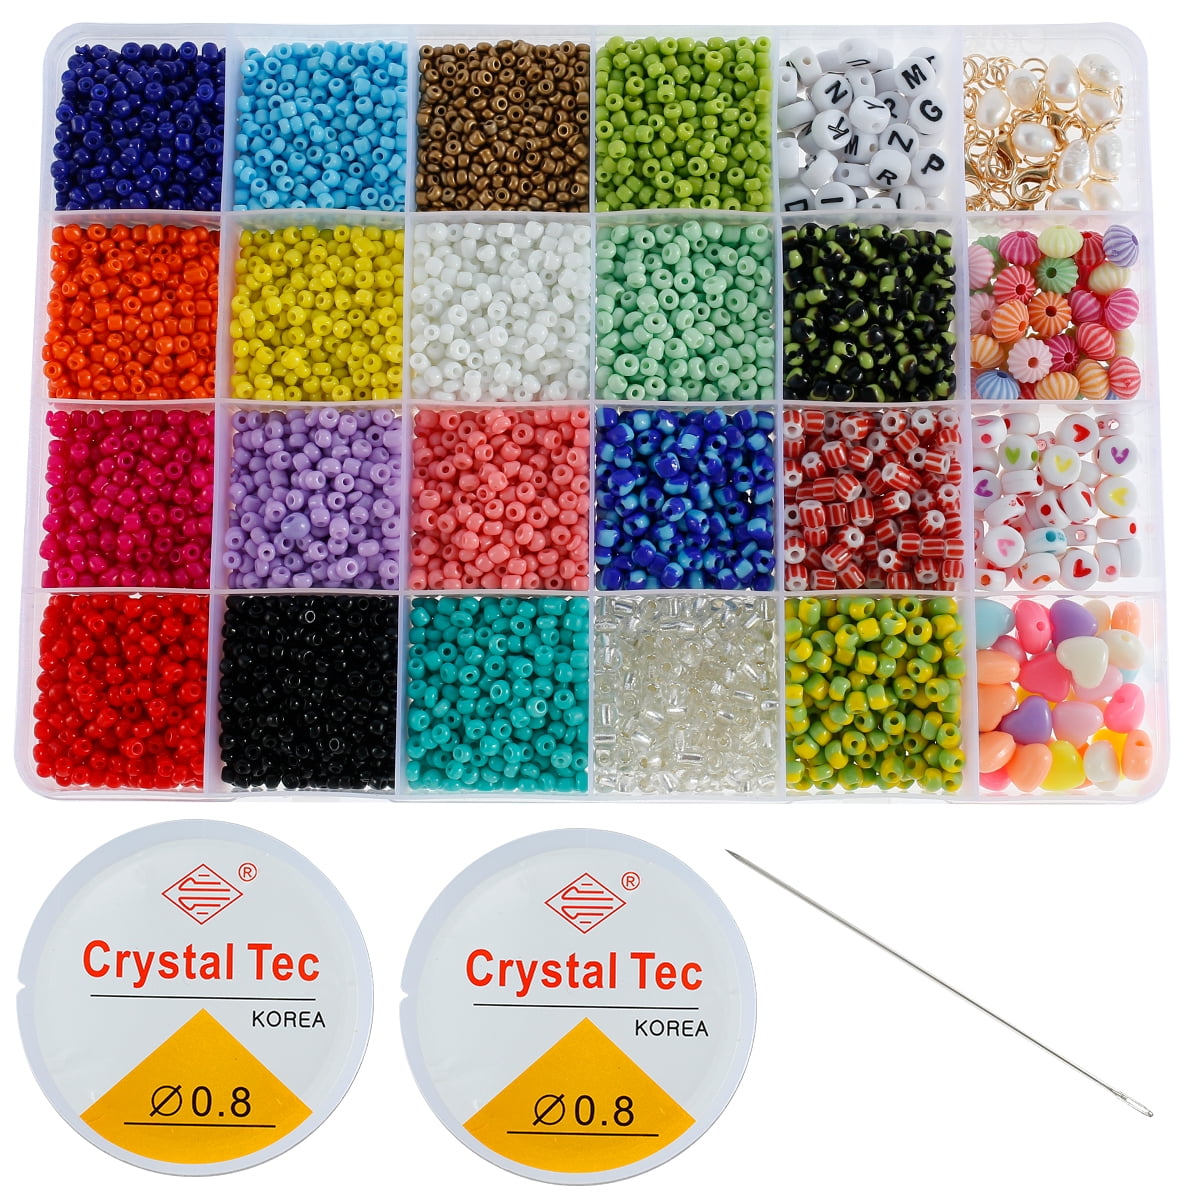 CraftyBook 7500pc Beads Bracelet Making Kits with Small Glass and Letter  Beads